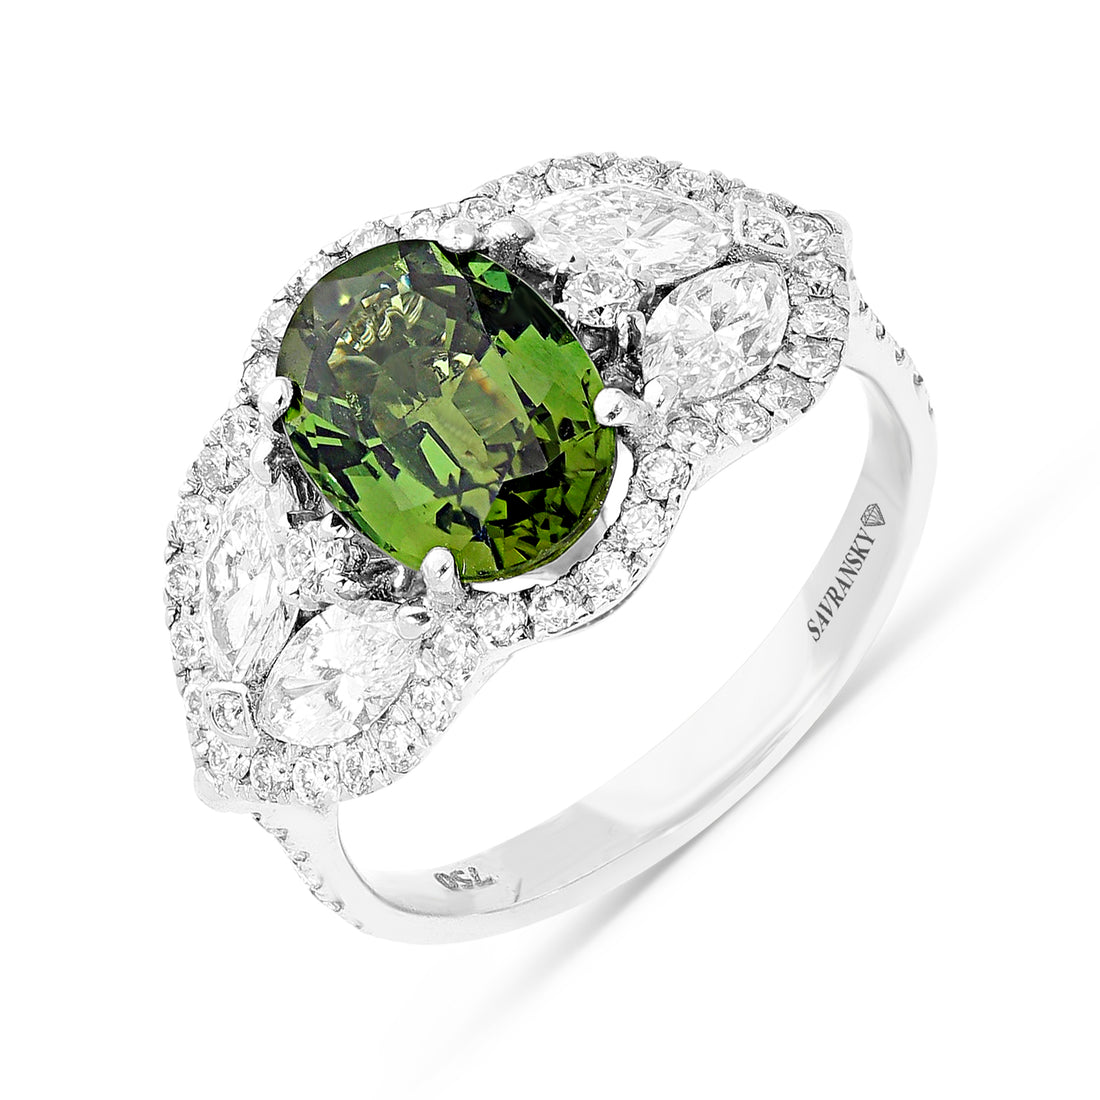 Oval Cut Alexandrite and Marquise Cut Diamond Ring - 3.82 Carat